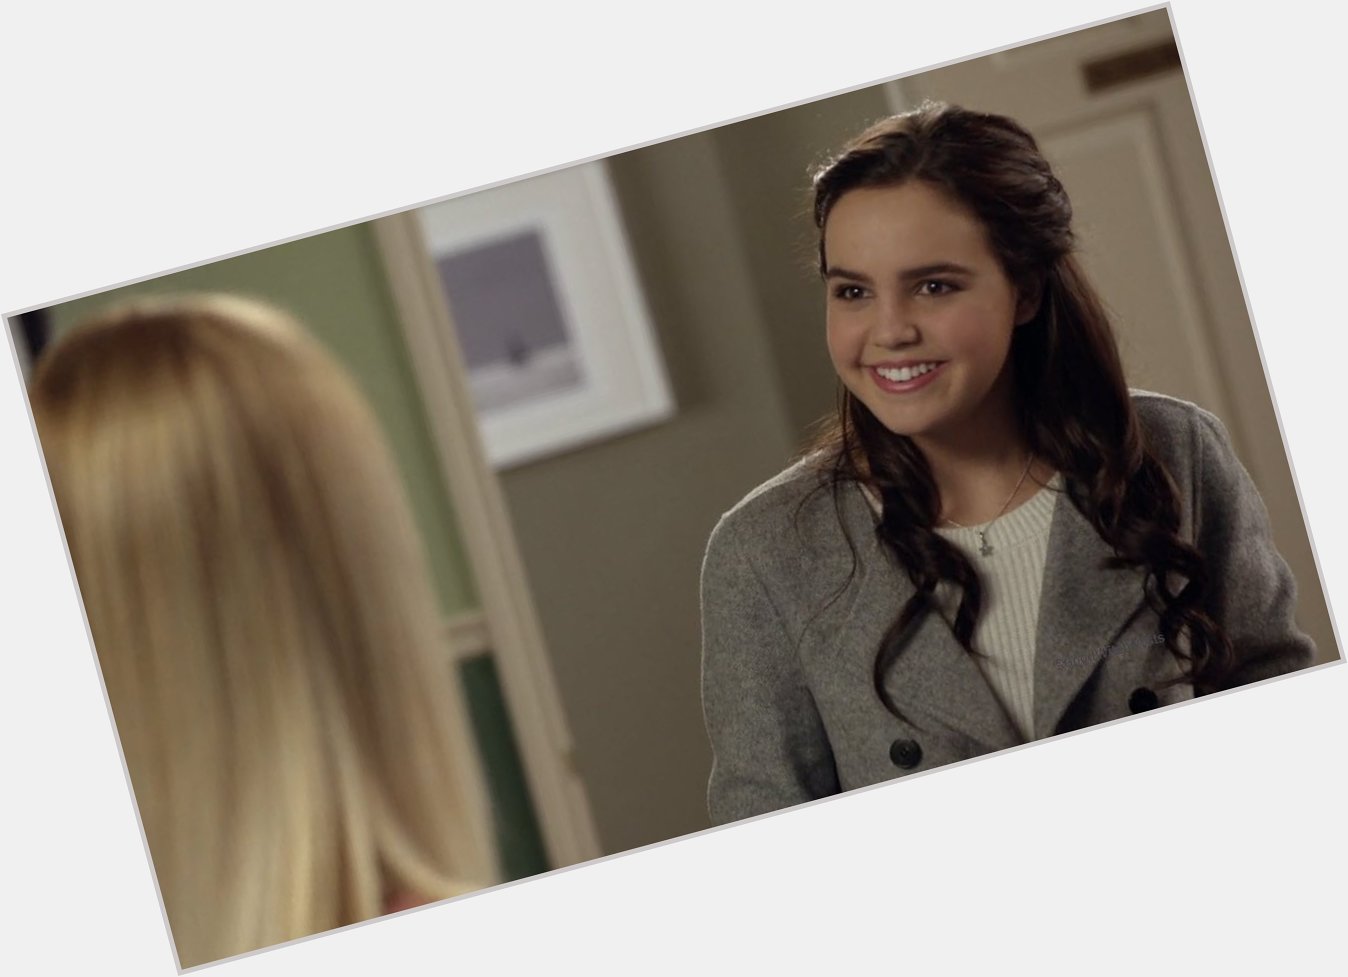 Happy birthday to both Grace Russell and Bailee Madison!   